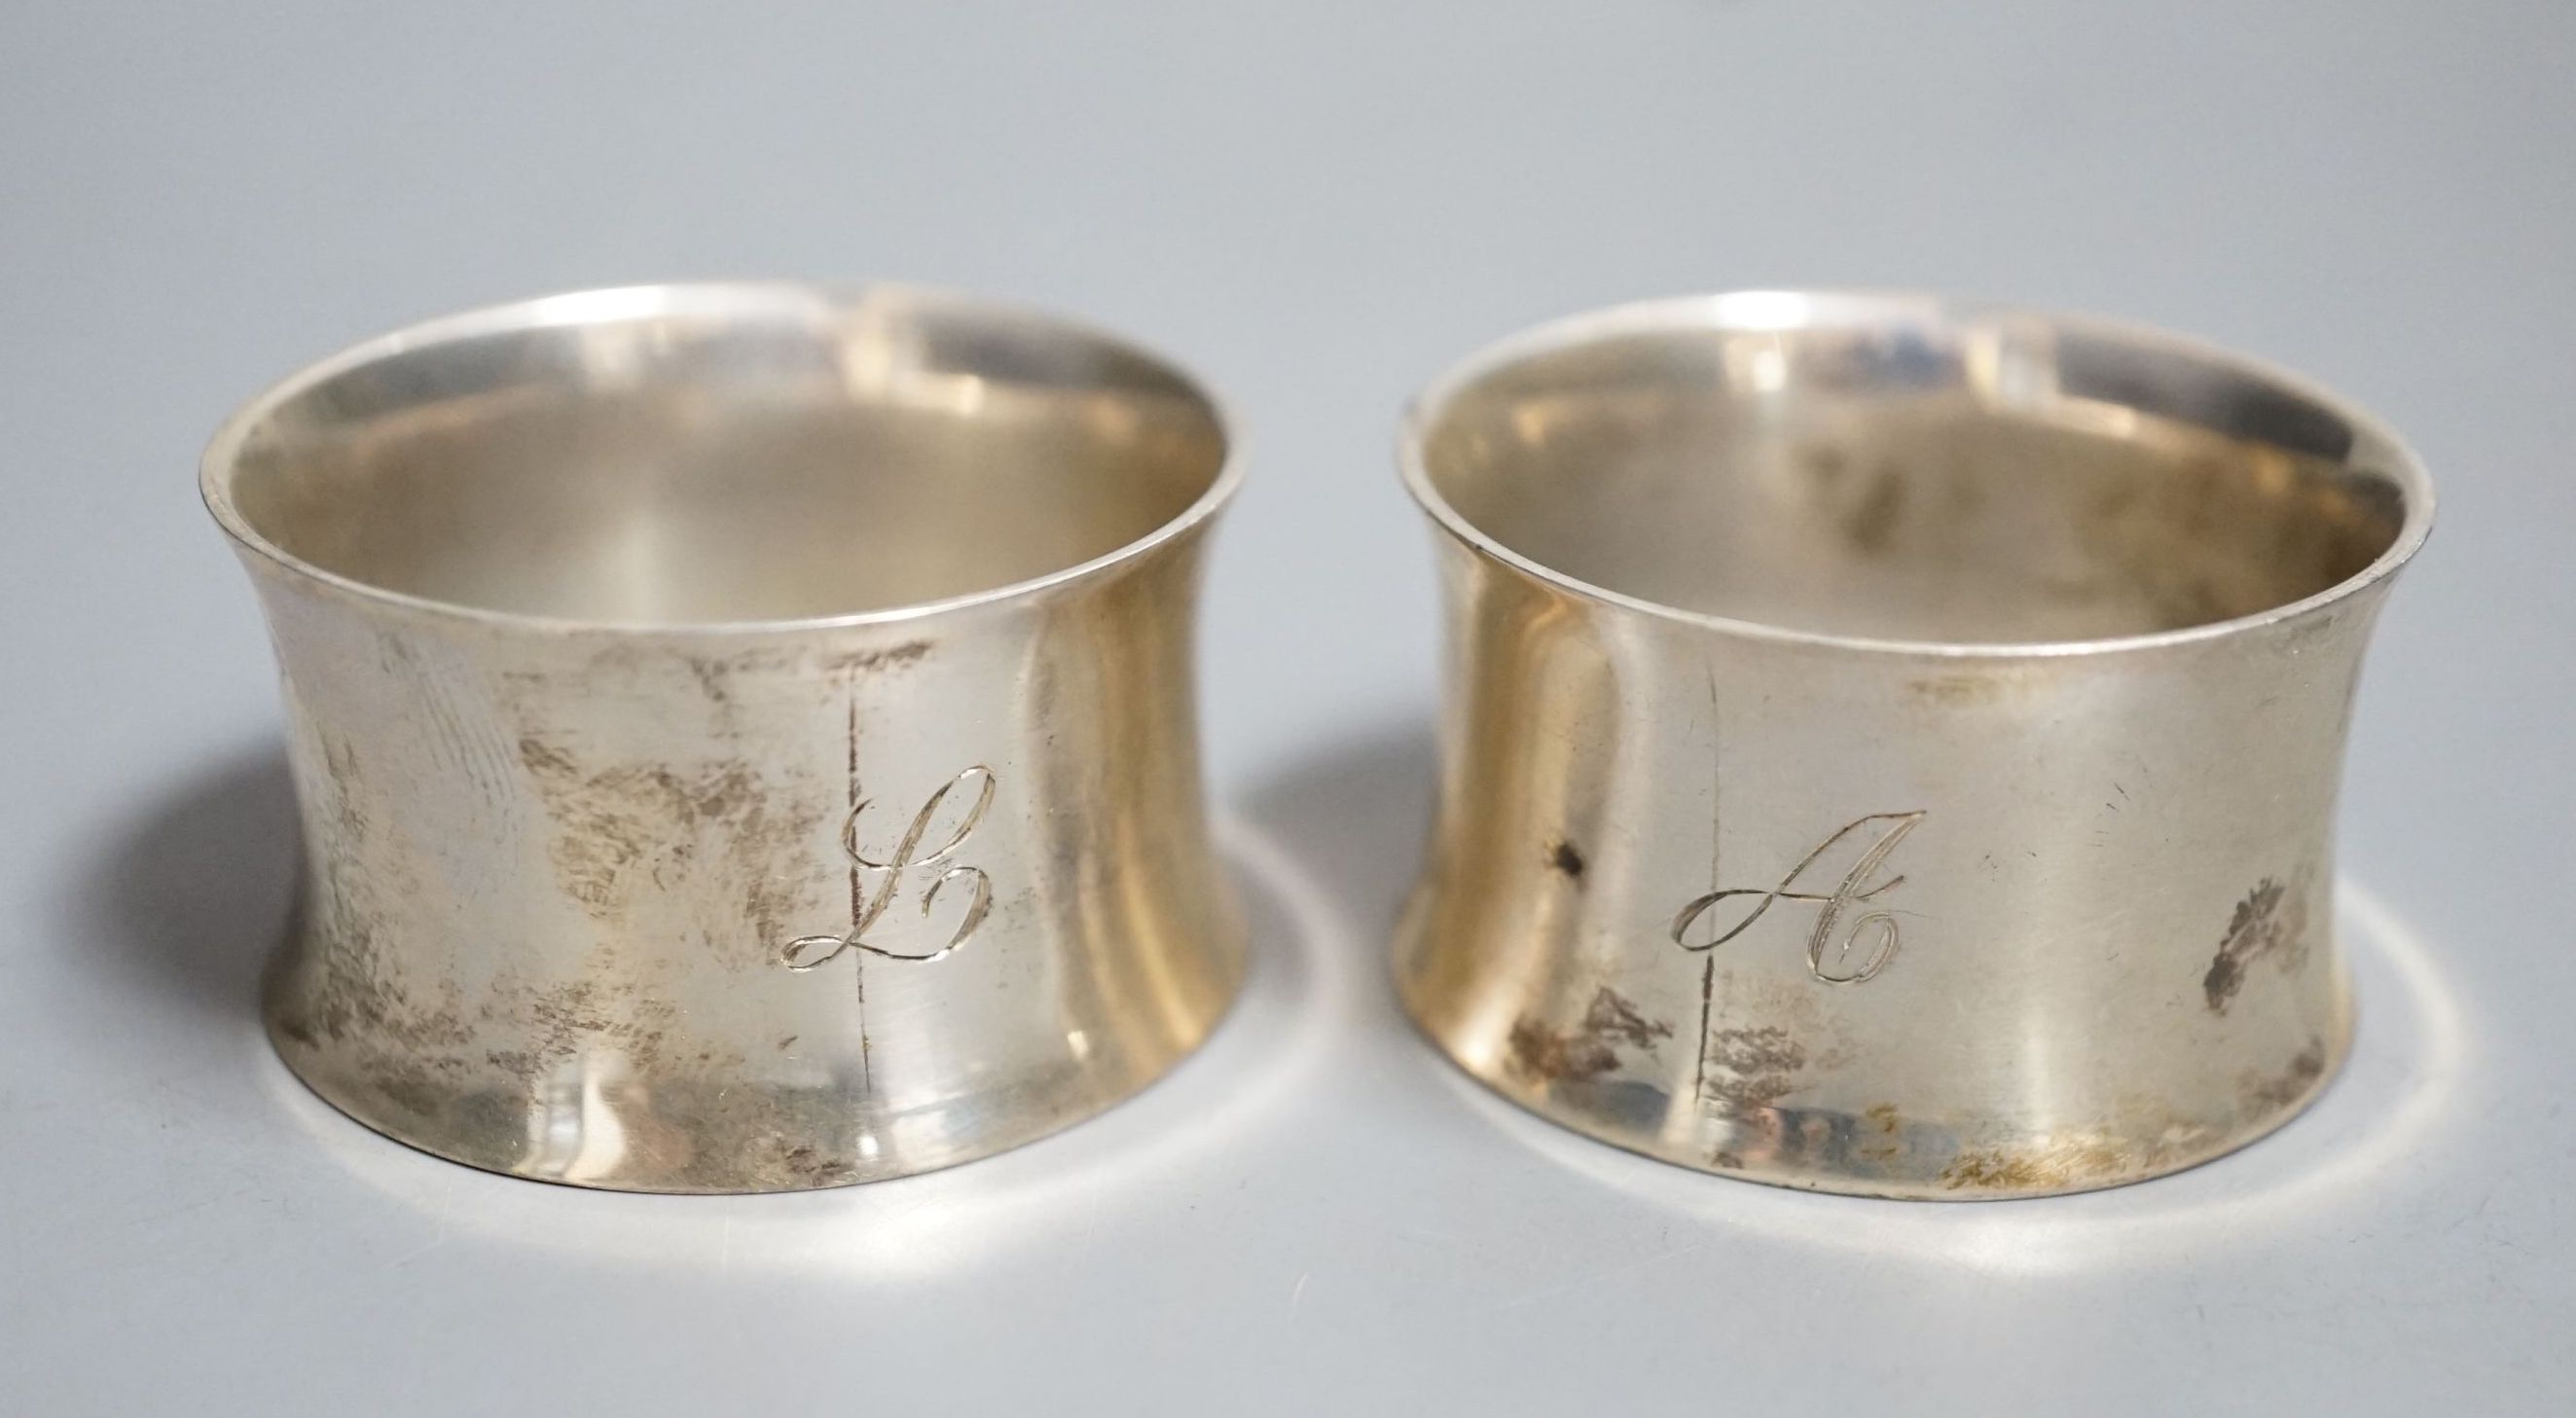 A pair of George V silver napkin rings, Atkin Brothers, Sheffield, 1918, engraved with the letter L, 85 grams.